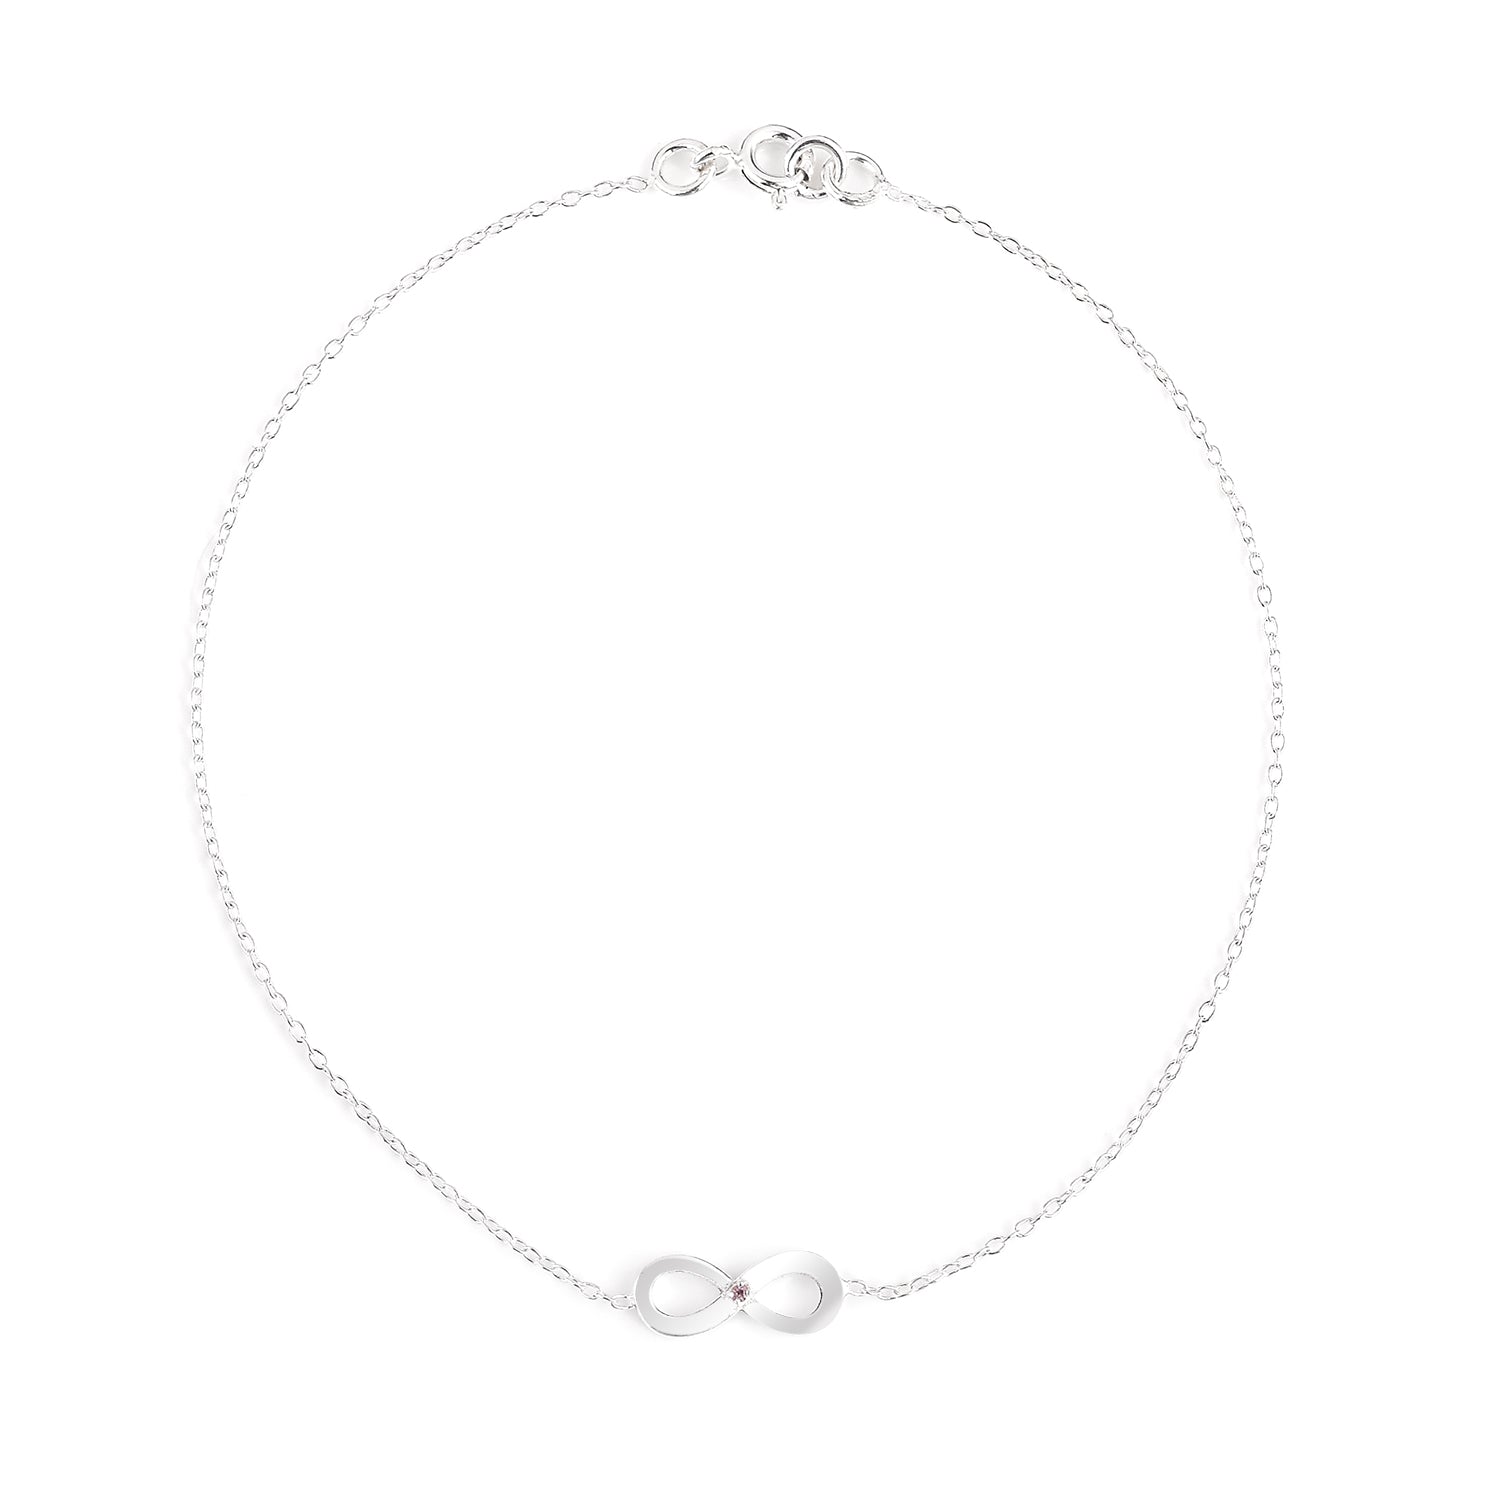 Infinity Chain Bracelet with Minimal Silver Ring